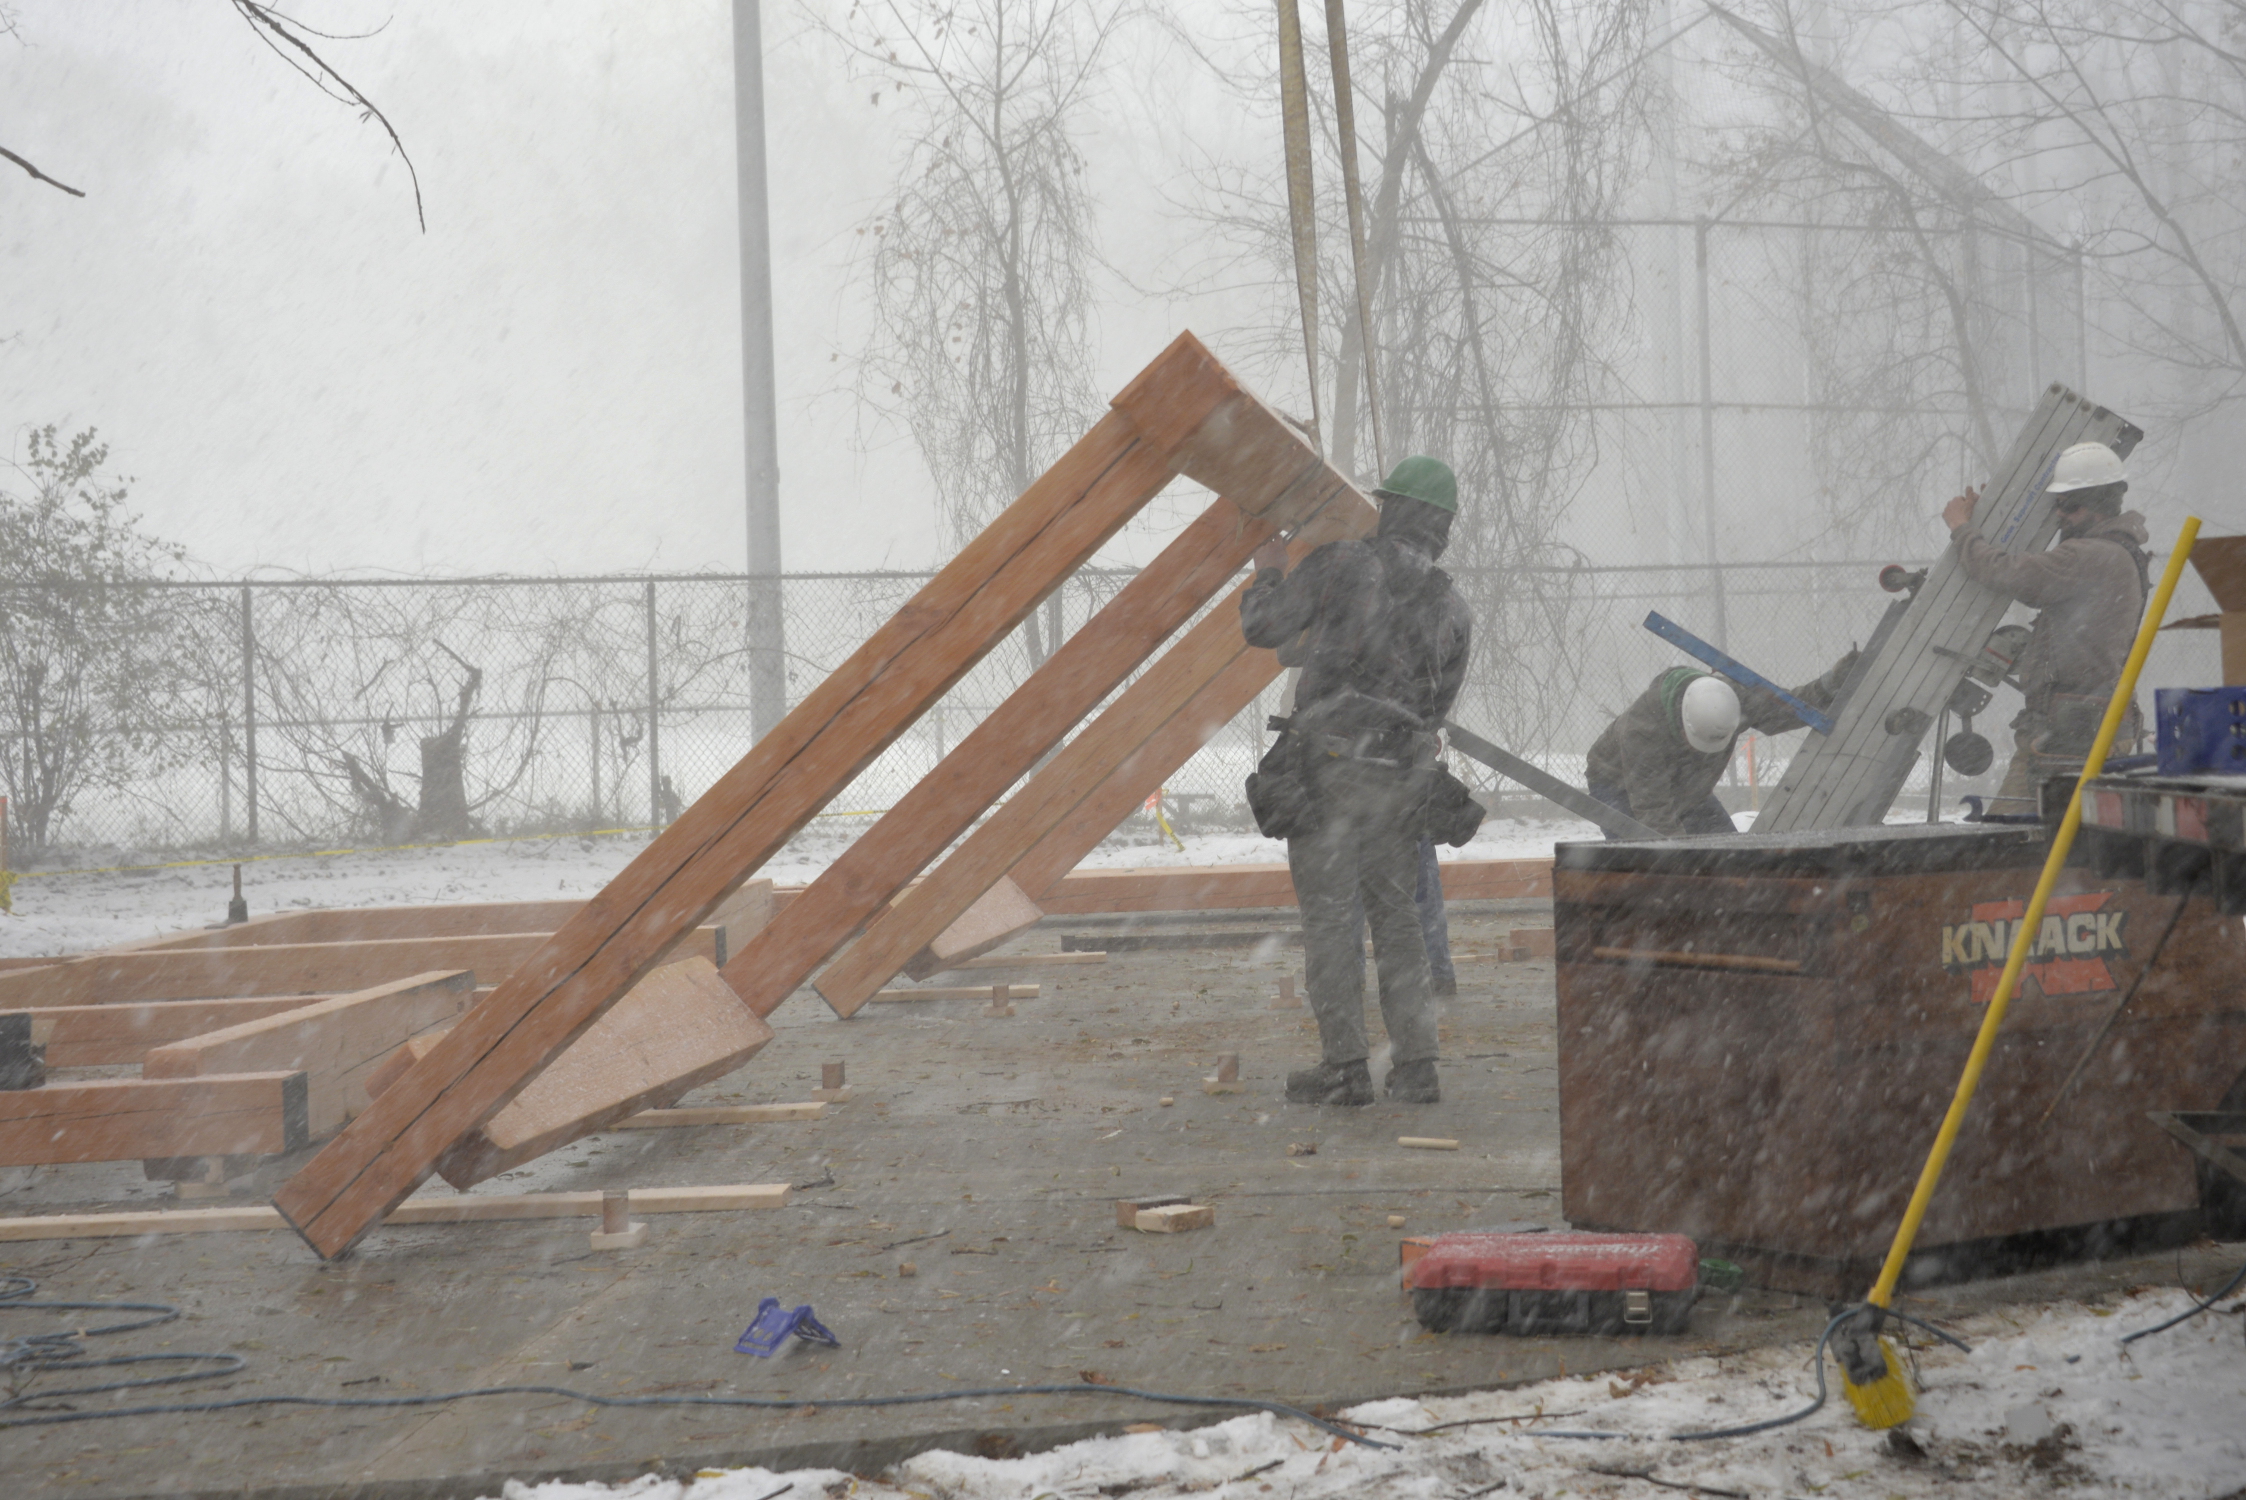 Working through winter weather the timber frame outdoor pavilion/classroom for the Rochester Childfirst Network was raised by New Energy Works craftsmen.